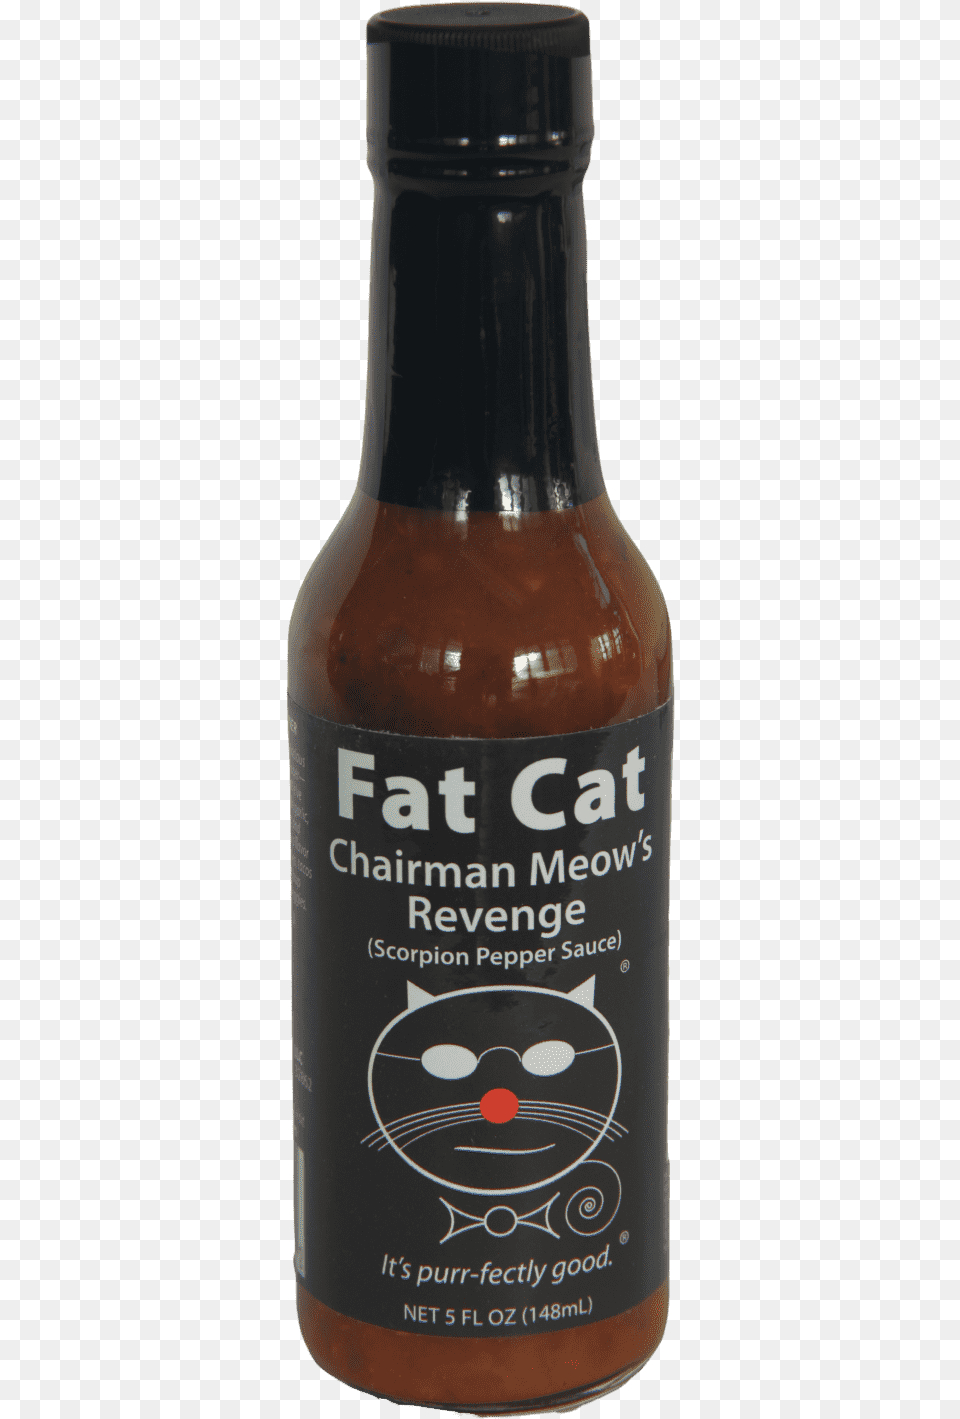 Fat Cat Chairman Meows Revenge Scorpion Pepper Sauce Tomato Sauce, Alcohol, Beer, Beverage, Beer Bottle Free Png